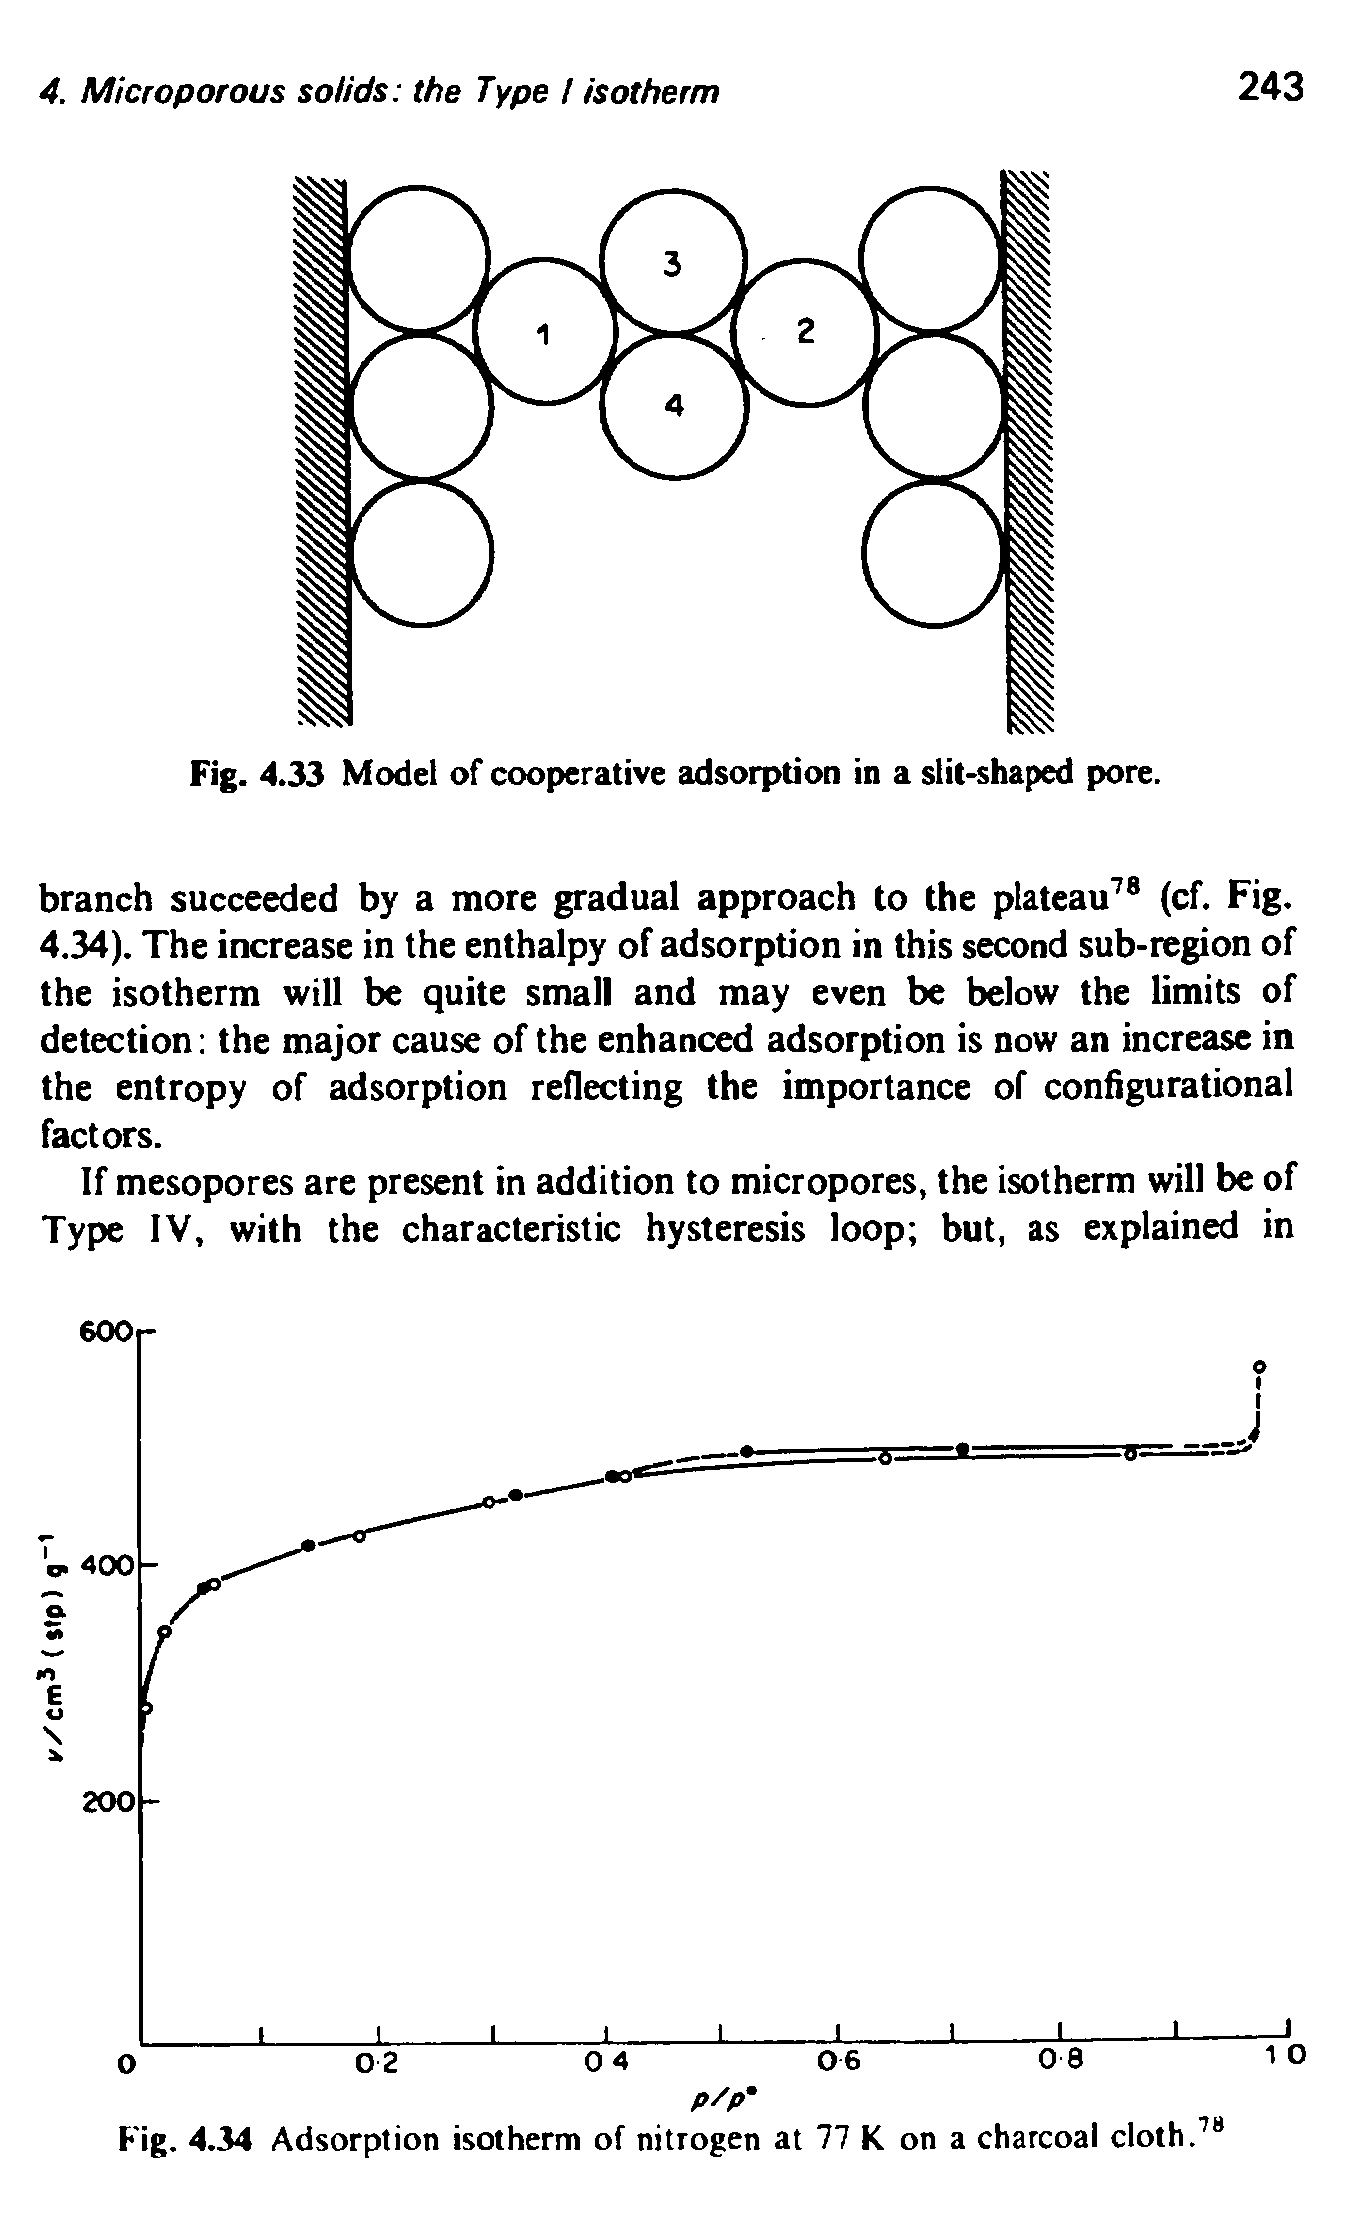 Fig. 4.33 Model of cooperative adsorption in a slit-shaped pore.